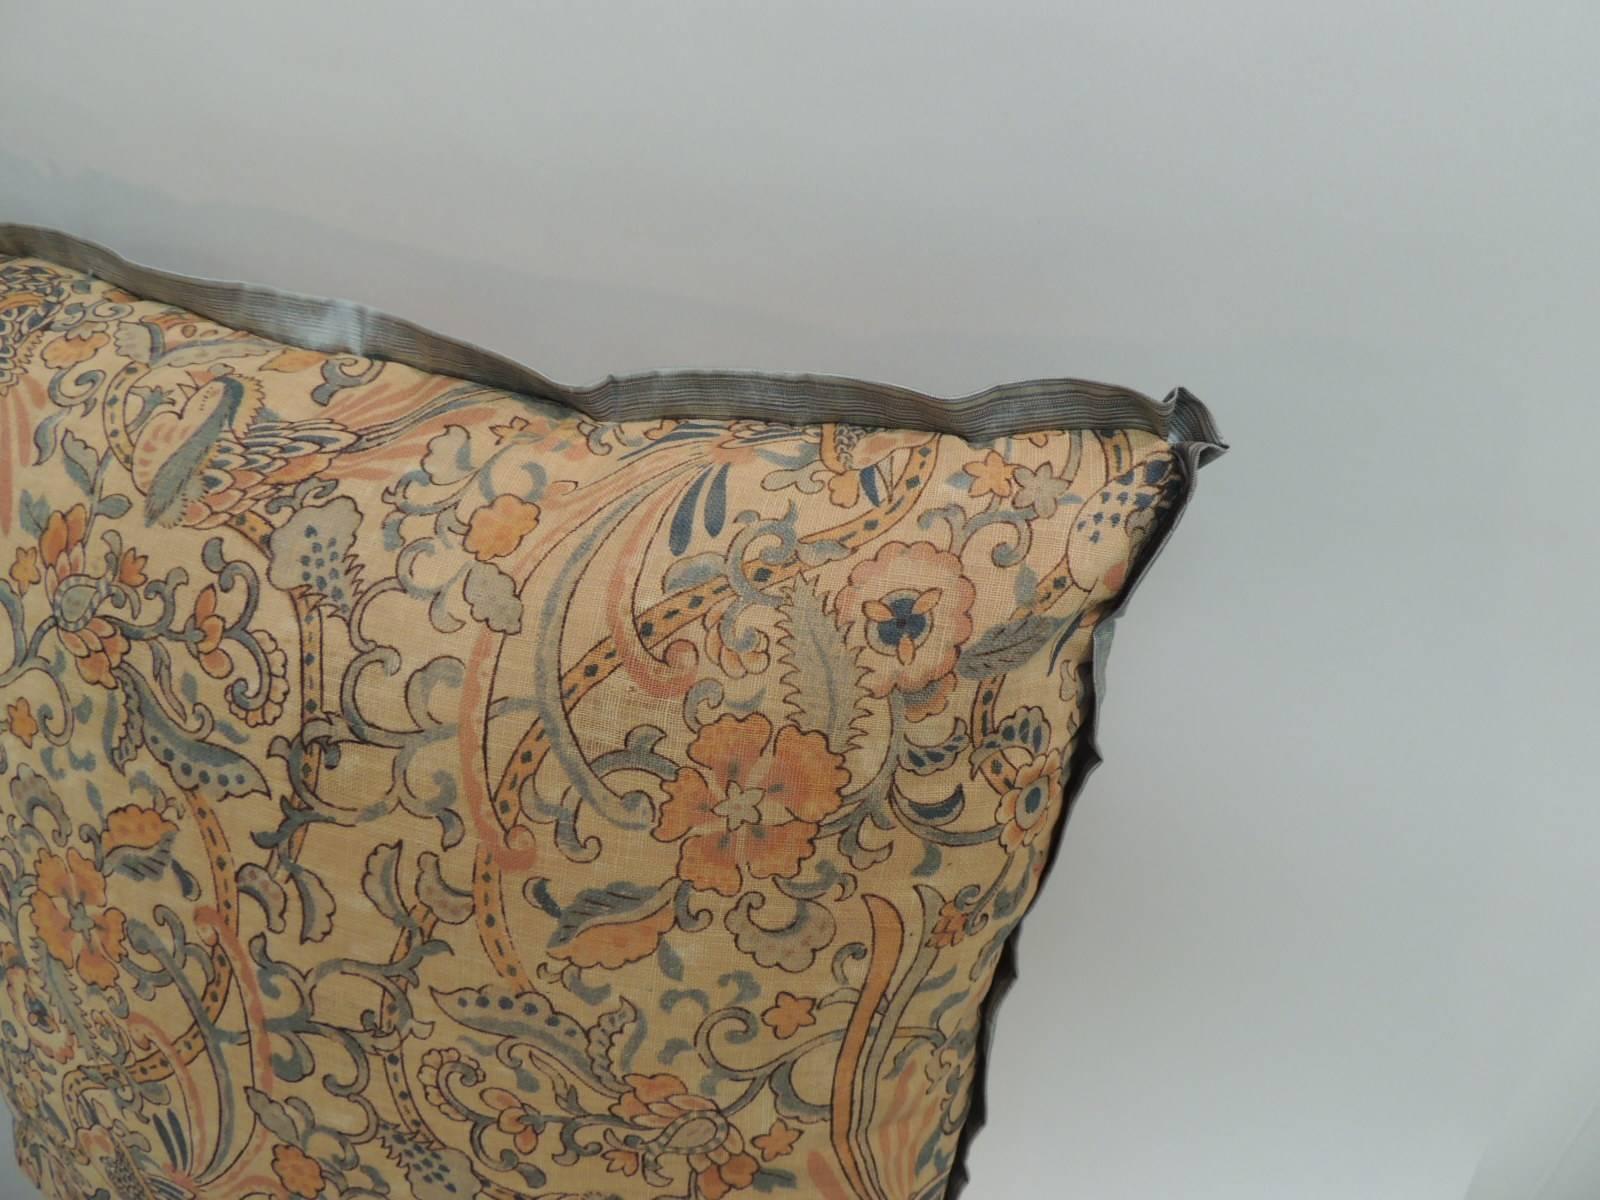 Antique Textiles Galleries:
Pair of 19th Century Arts & Crafts English Printed Linen Square Decorative Pillows
Pair of 19th century arts & crafts printed linen decorative pillows depicting blooming flowers and birds.  Double sided decorative English